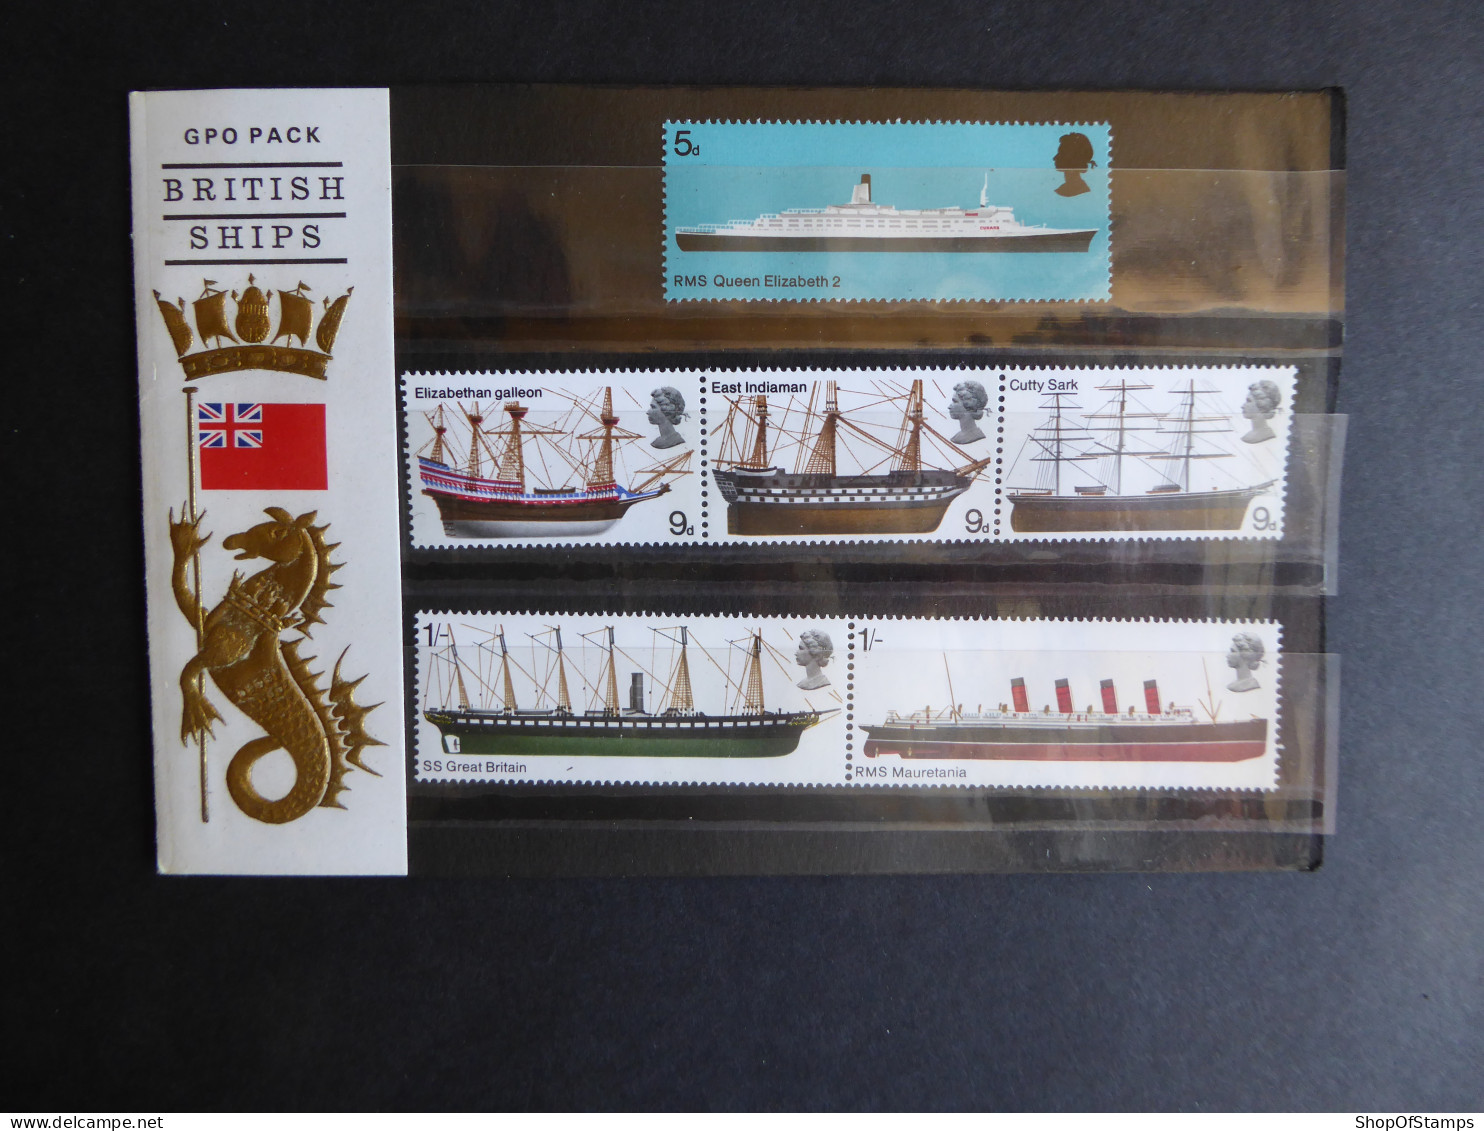 GREAT BRITAIN SG 778-83 BRITISH SHIPS PRESENTATION PACK - Feuilles, Planches  Et Multiples